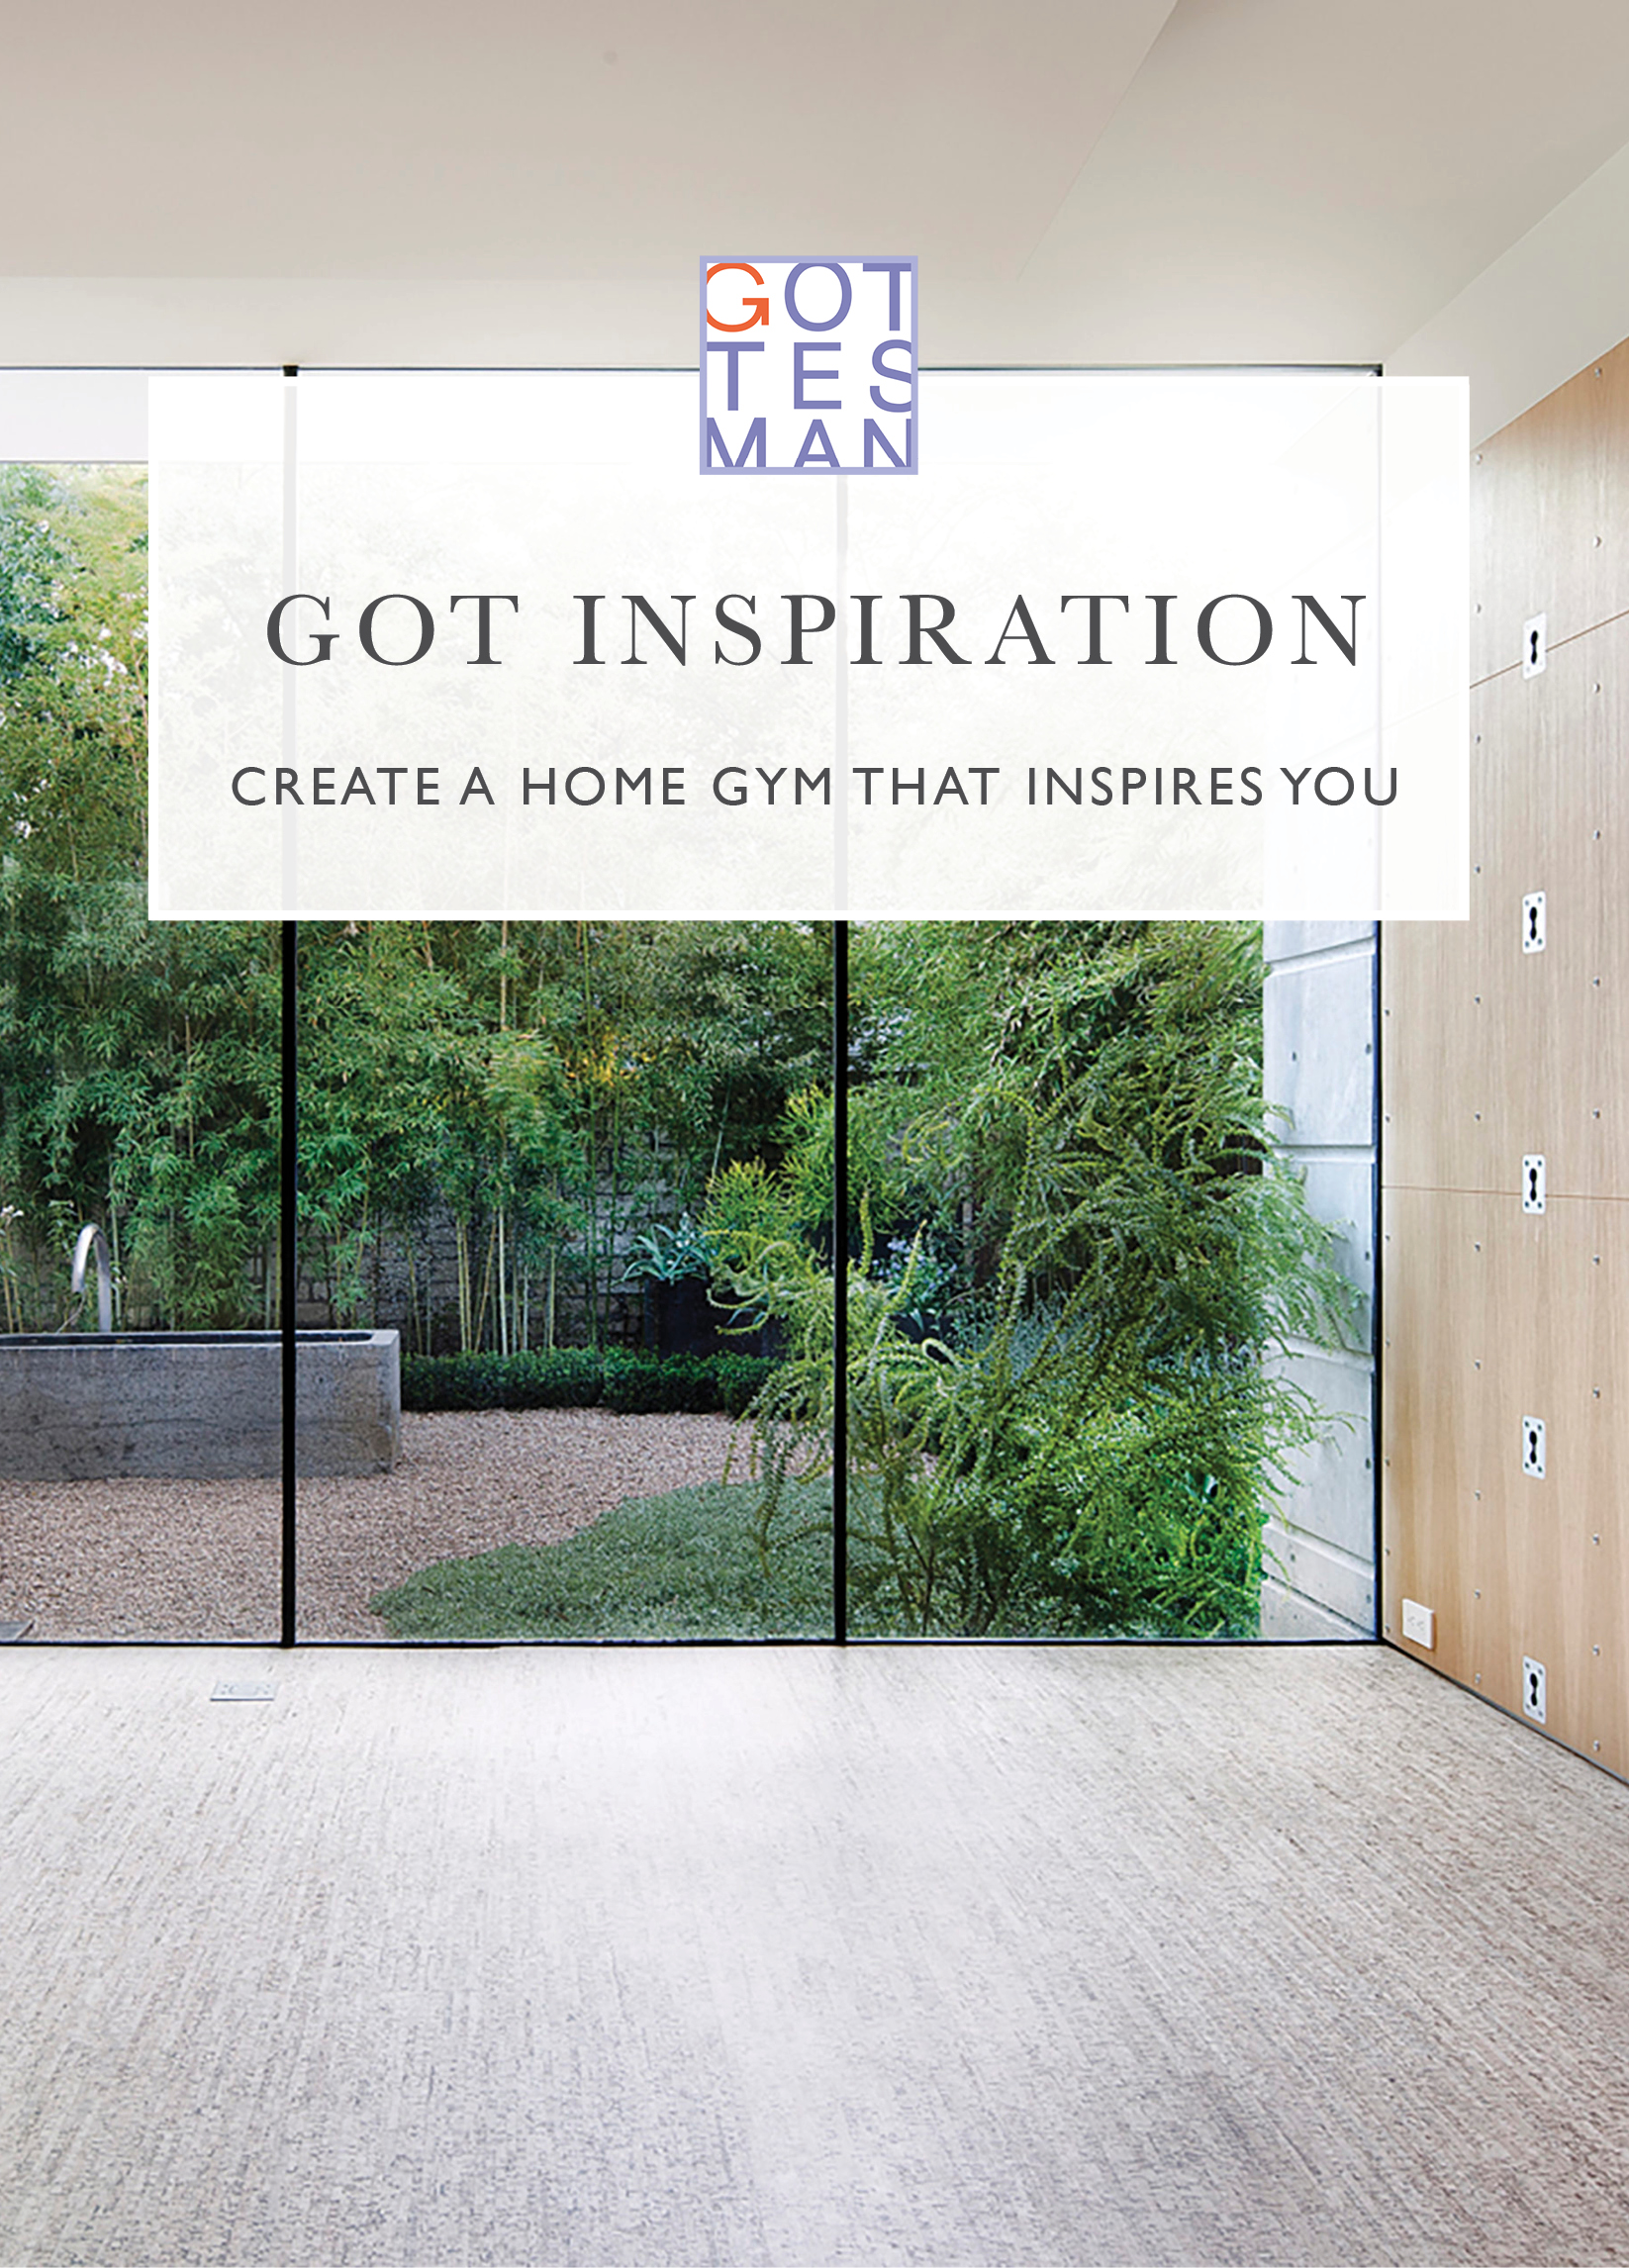 Studio interior with text overlay, "Got Inspiration: Create a Home Gym That Inspires You"